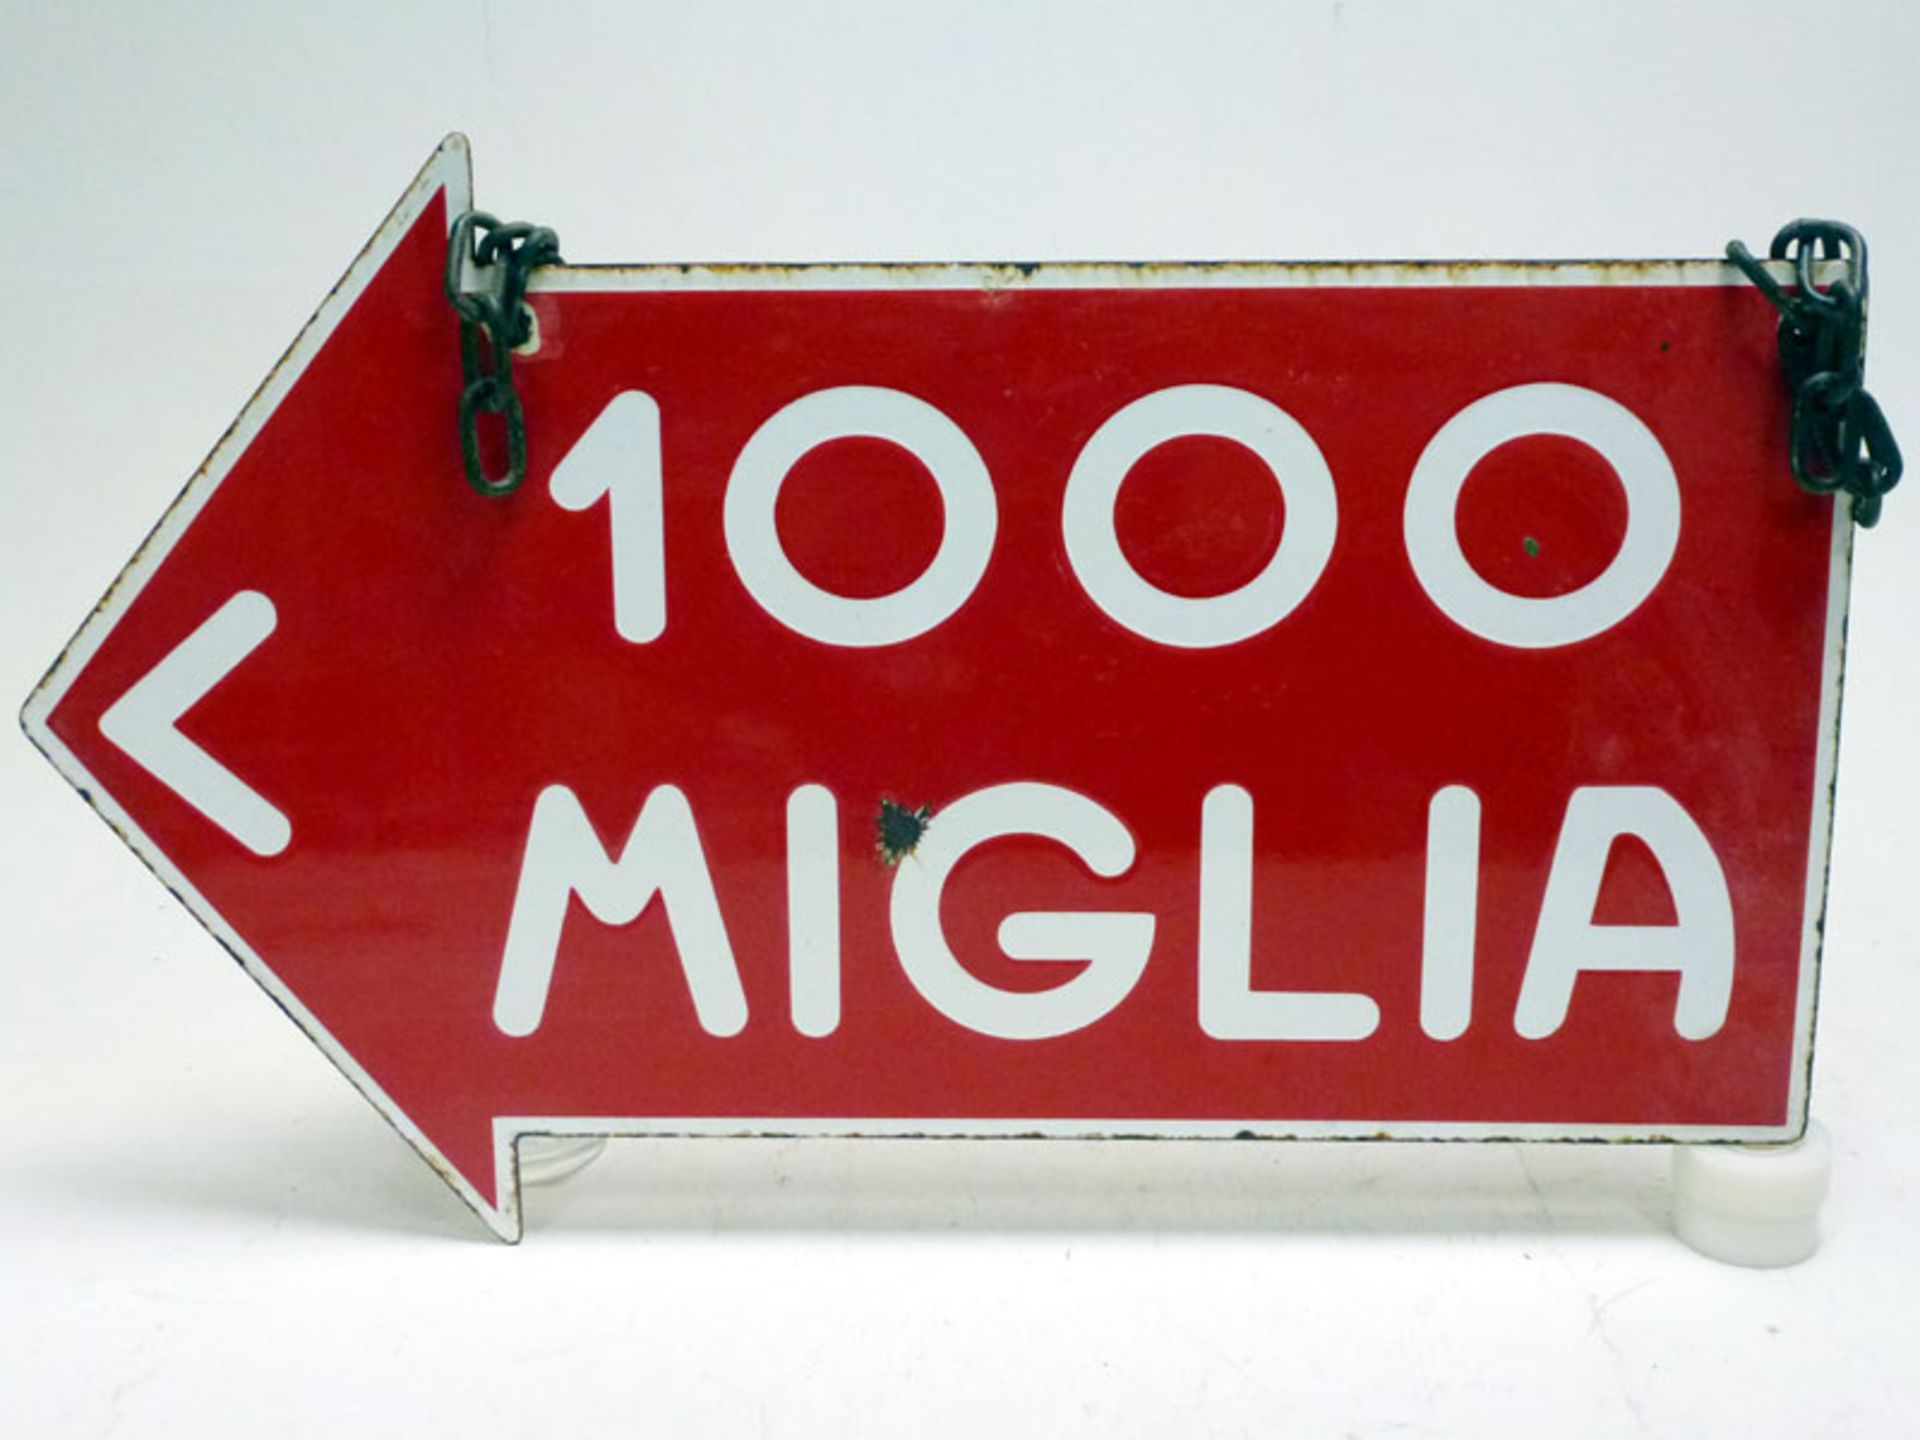 A Rare Mille Miglia Double-Sided Enamel Sign